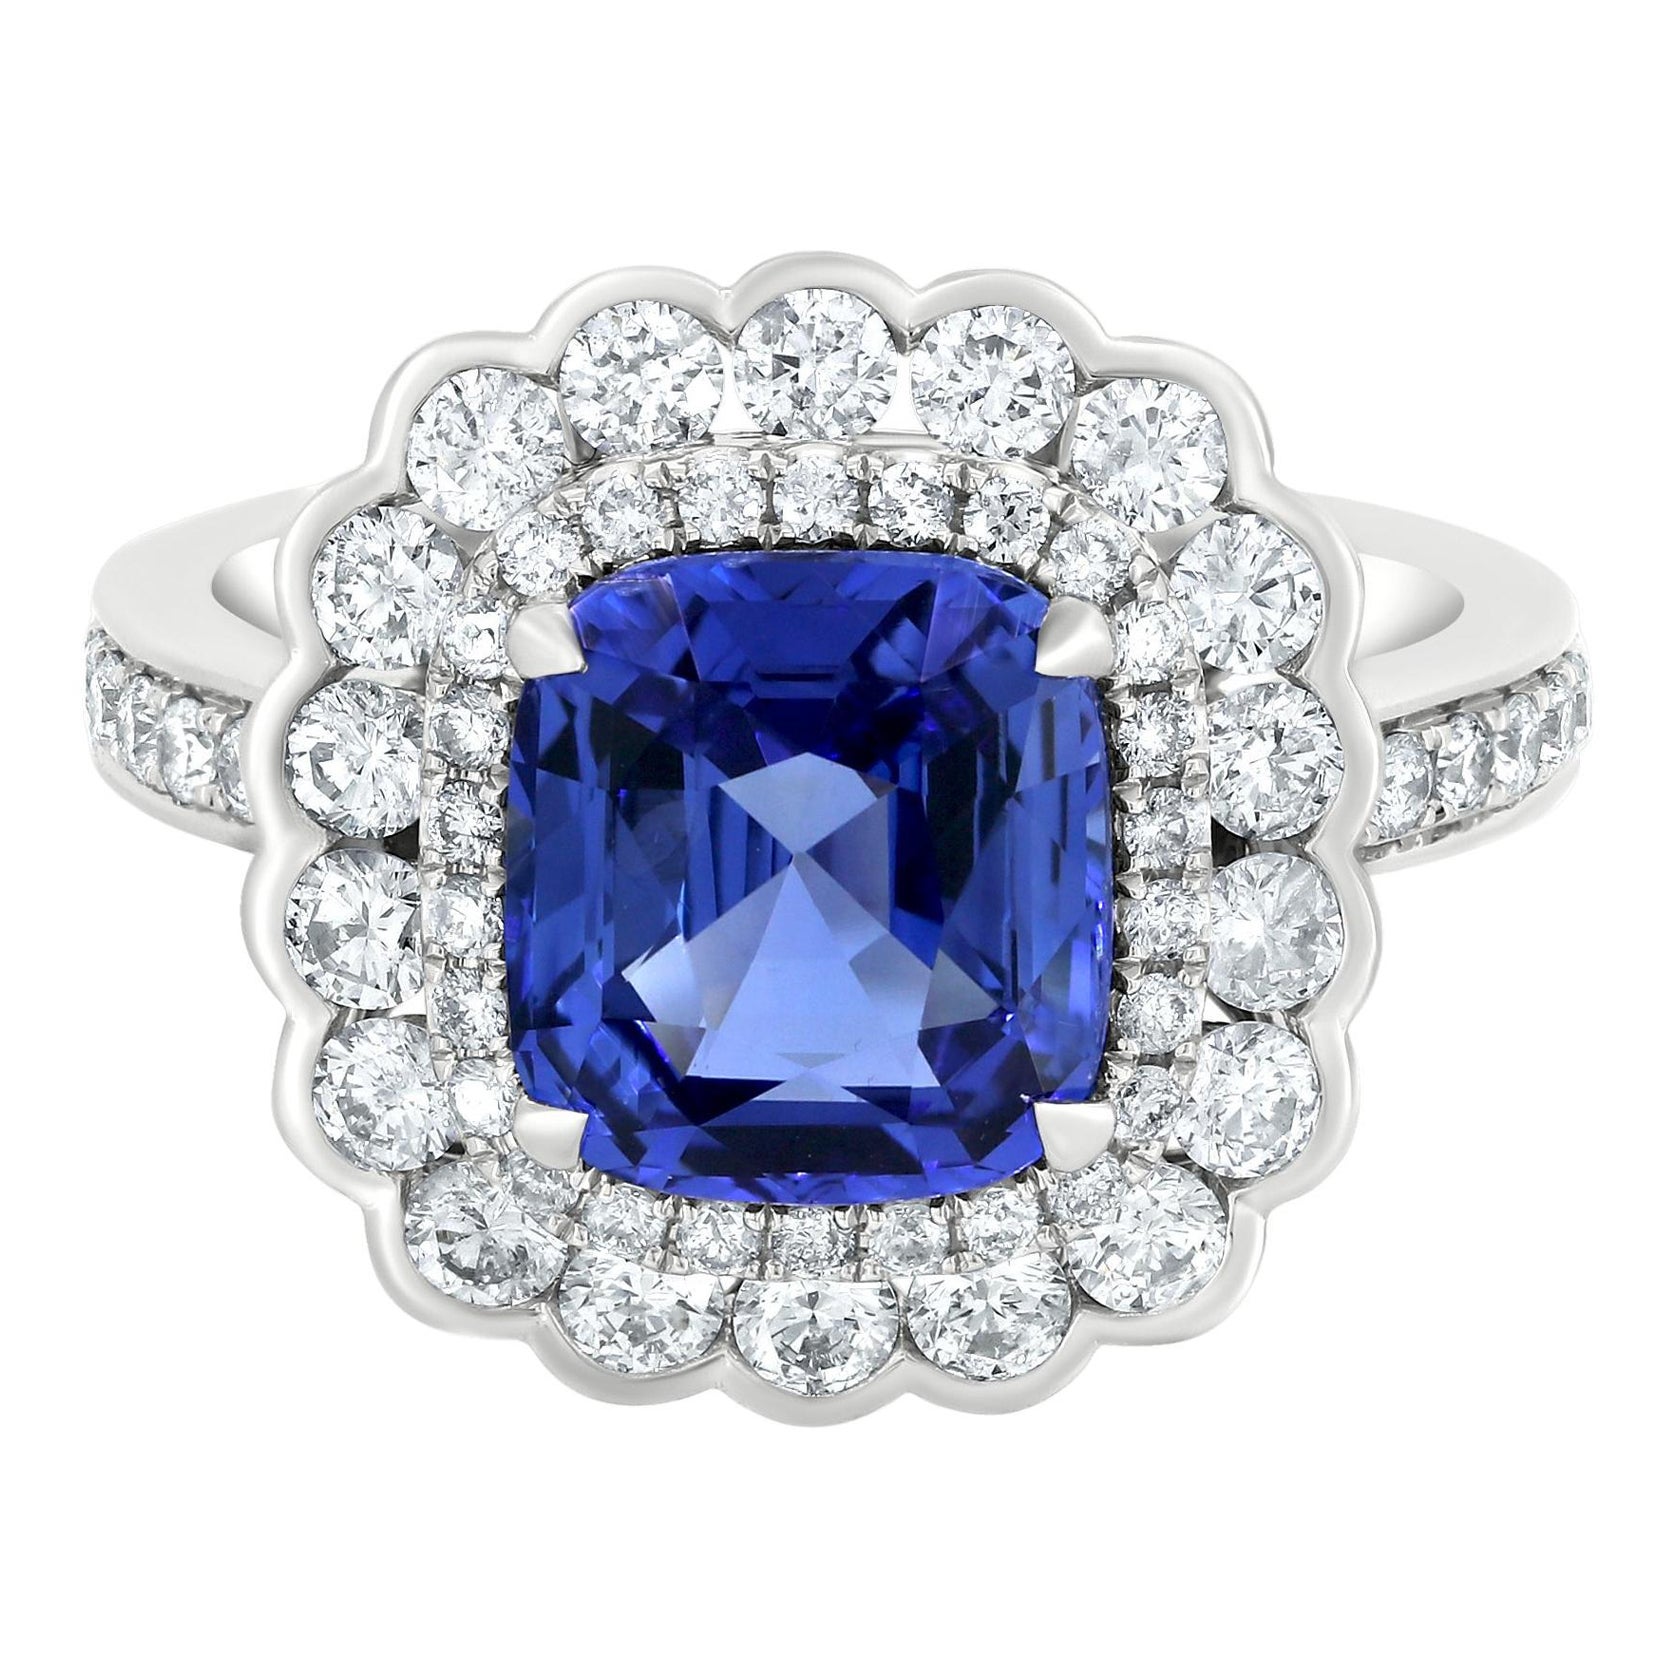 Nigaam 5.12 Cttw. Blue Sapphire and Diamond Glamorous Cluster Ring in 18K Gold For Sale